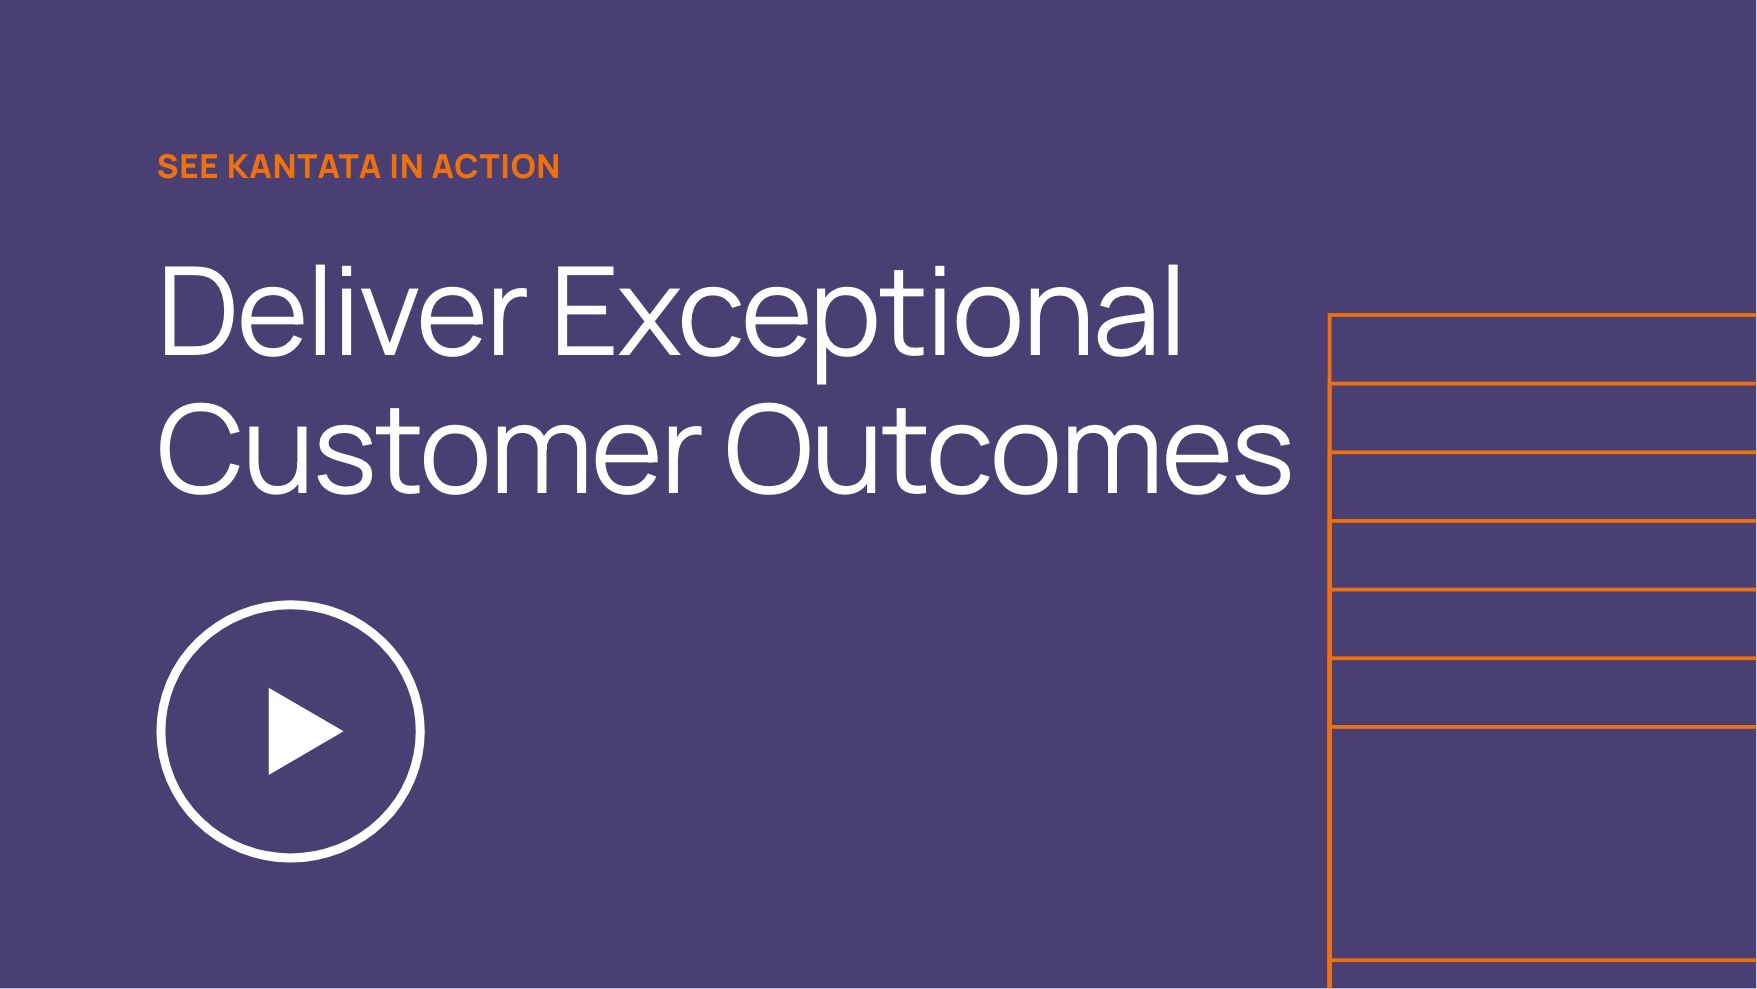 Demonstrate value. Drive better customer experiences.